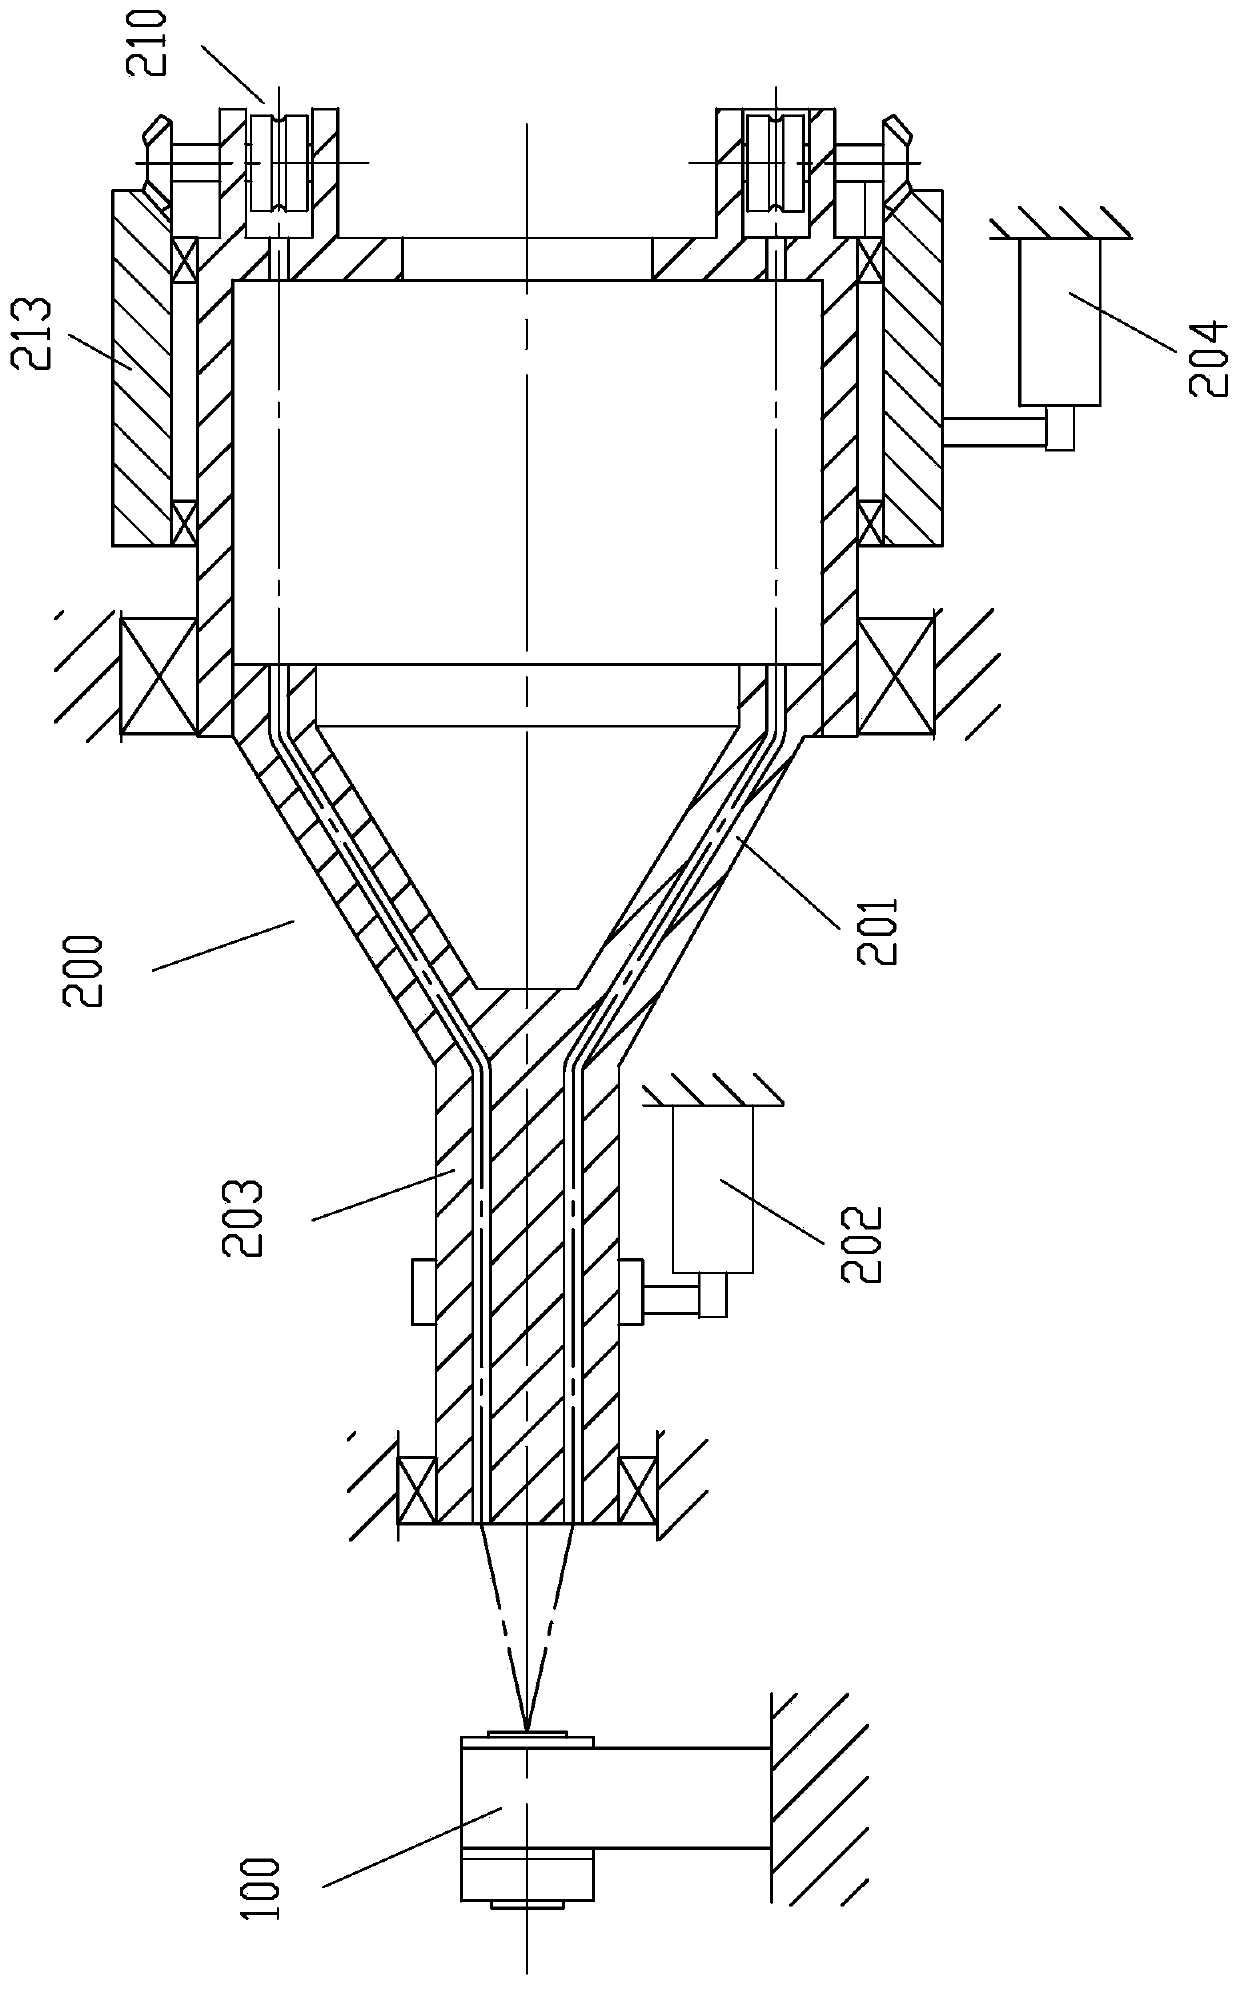 Device for twisting and disassembling steel wire rope or steel strand